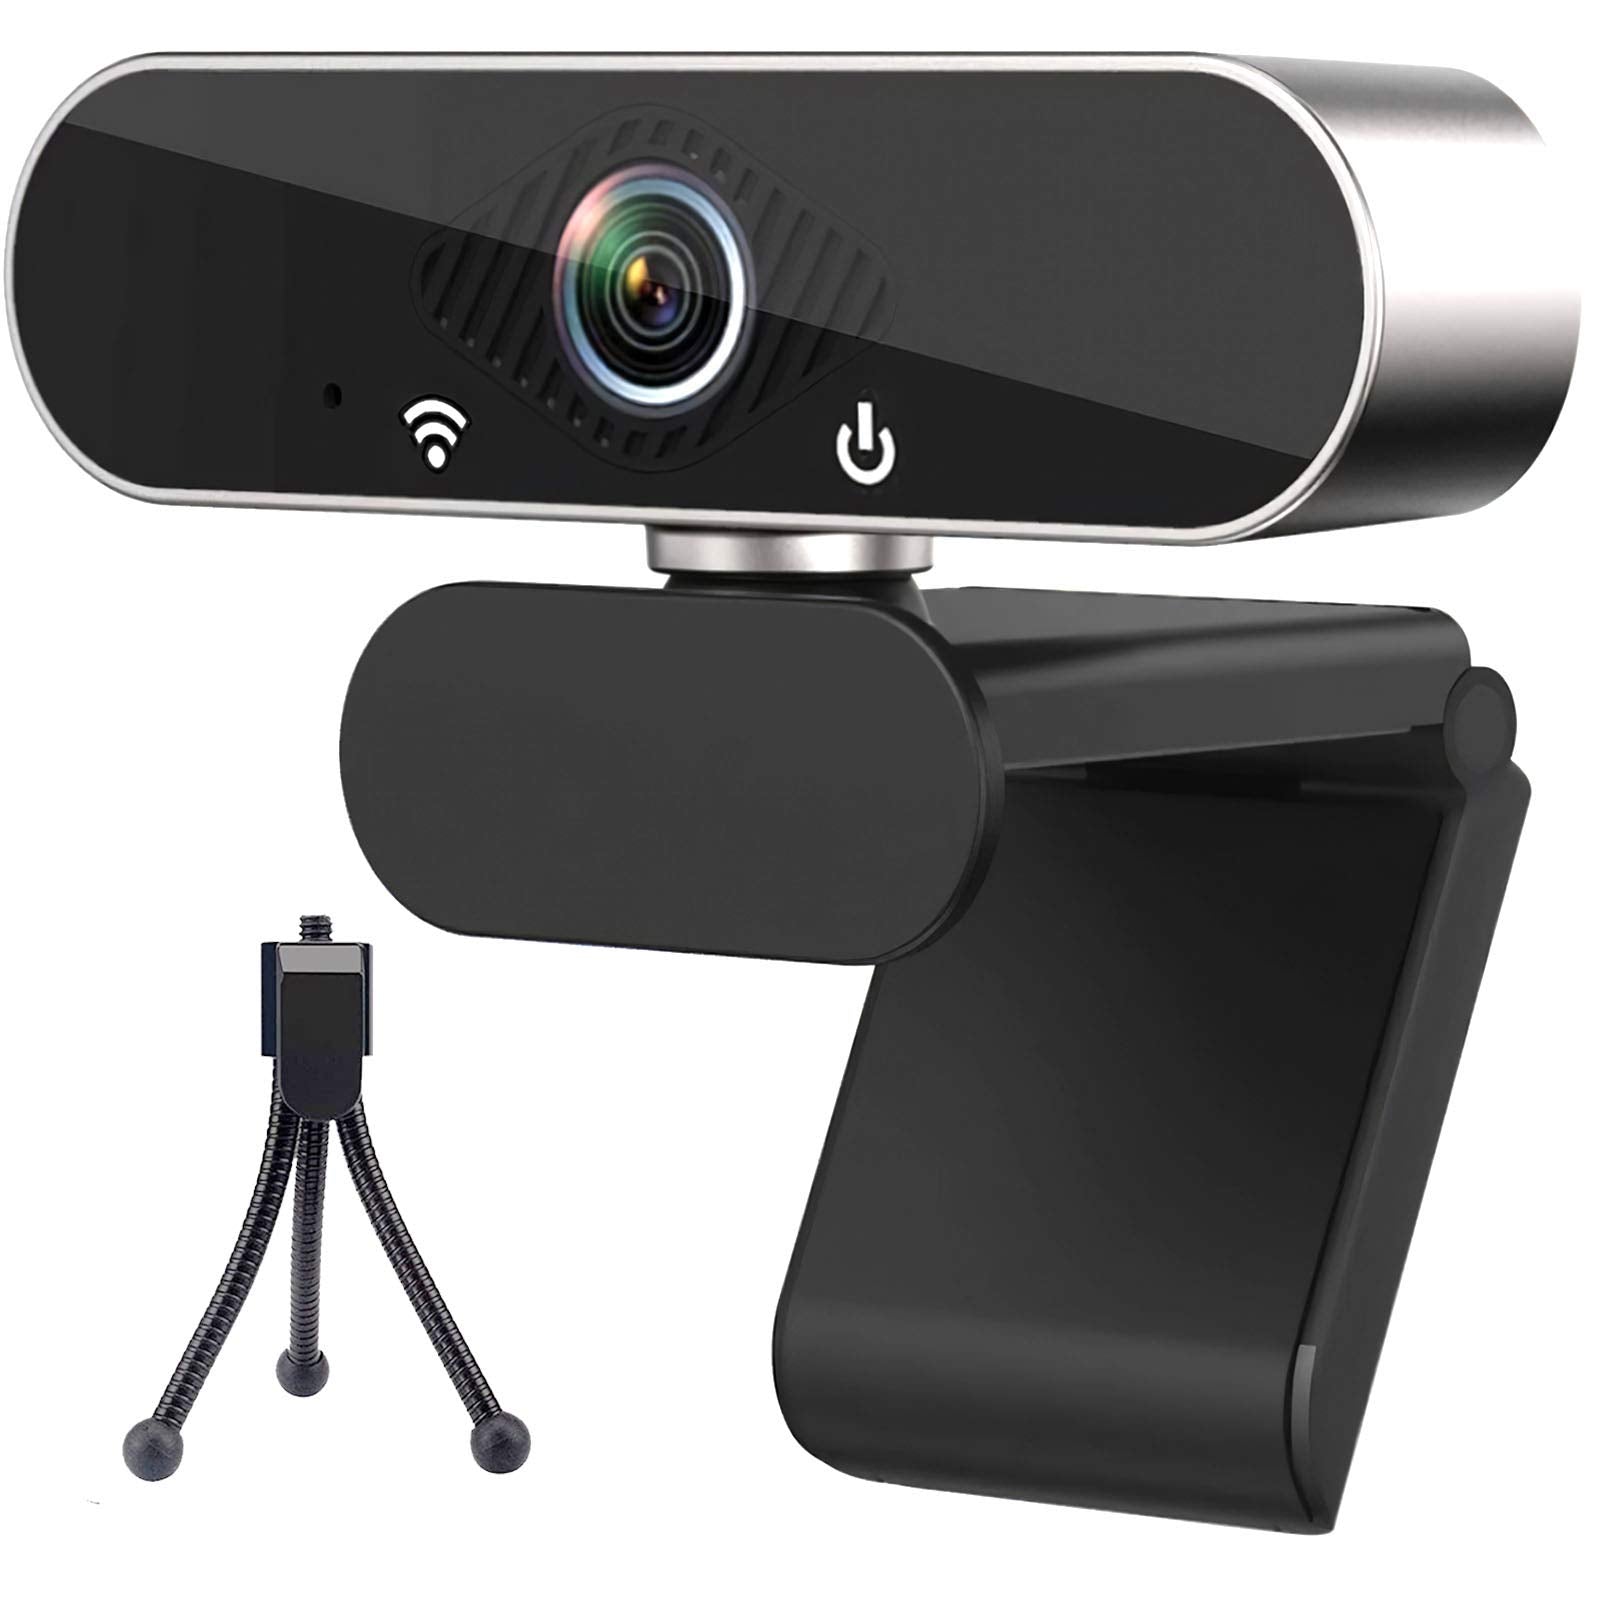 Webcam With Microph, 1080p Hd Webcam Streaming Computer Web Camera